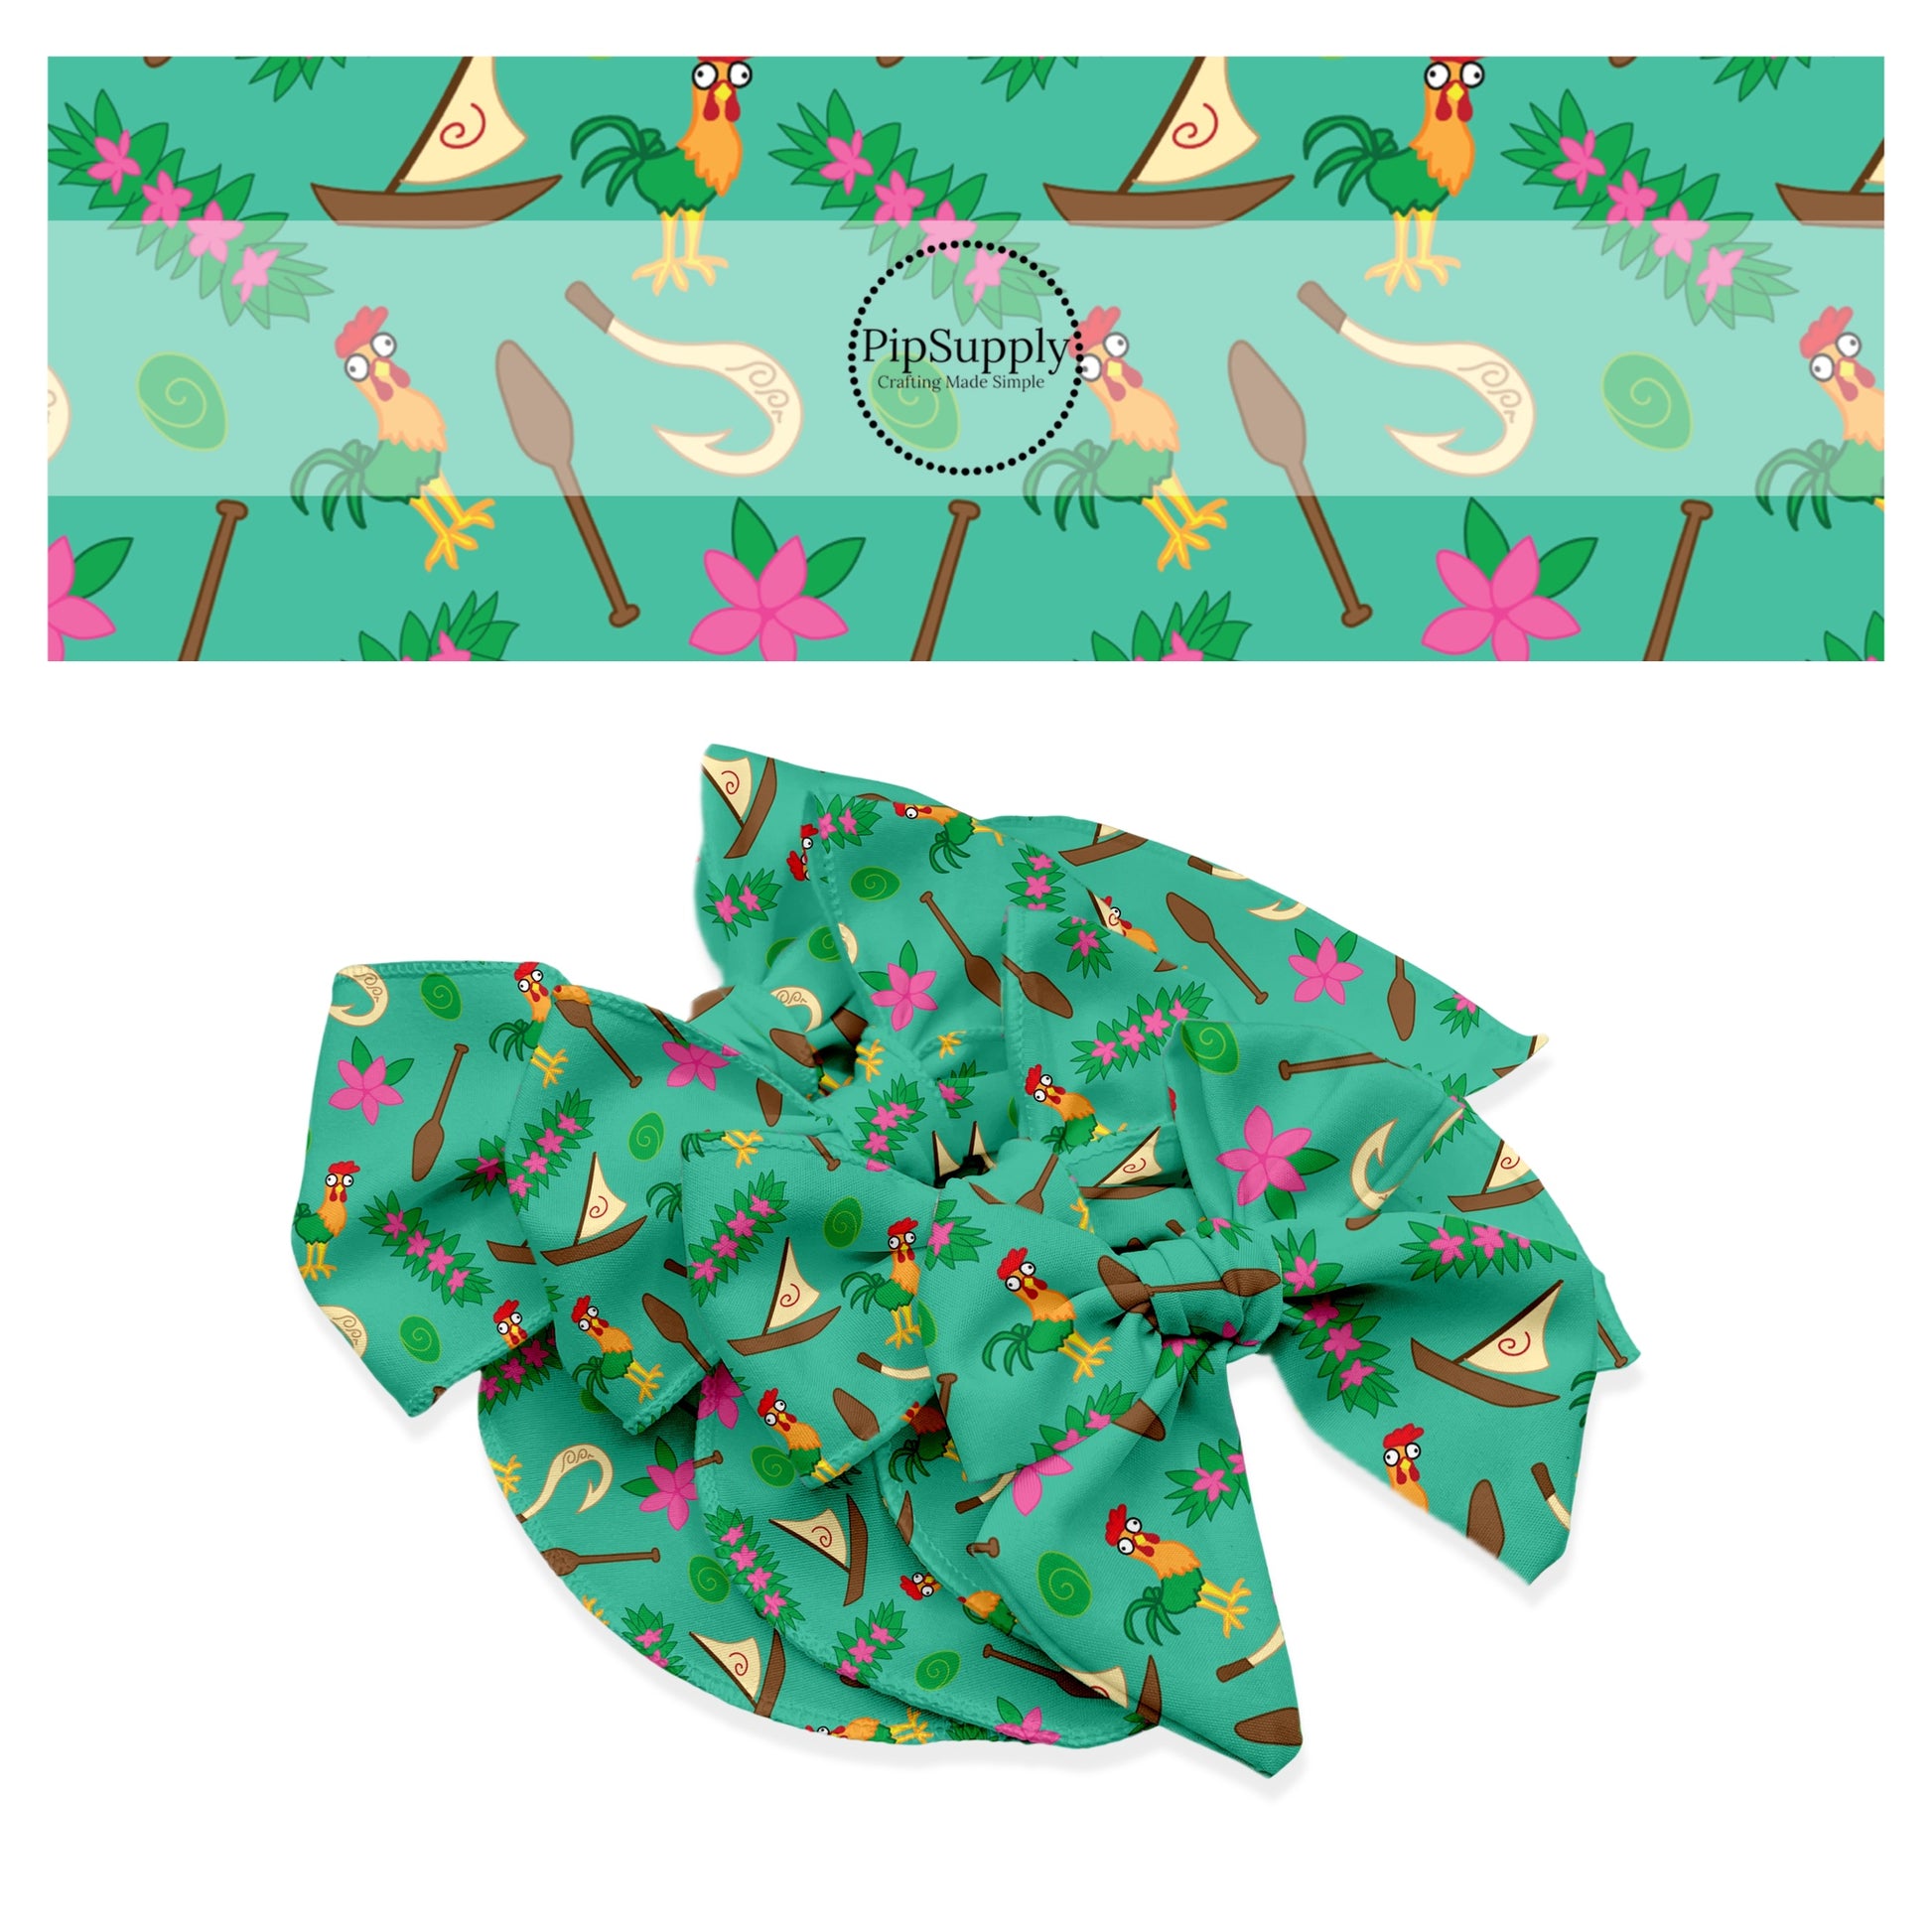 Paddle, sailboat, funny chicken, fish hook, and flowers on green bow strips